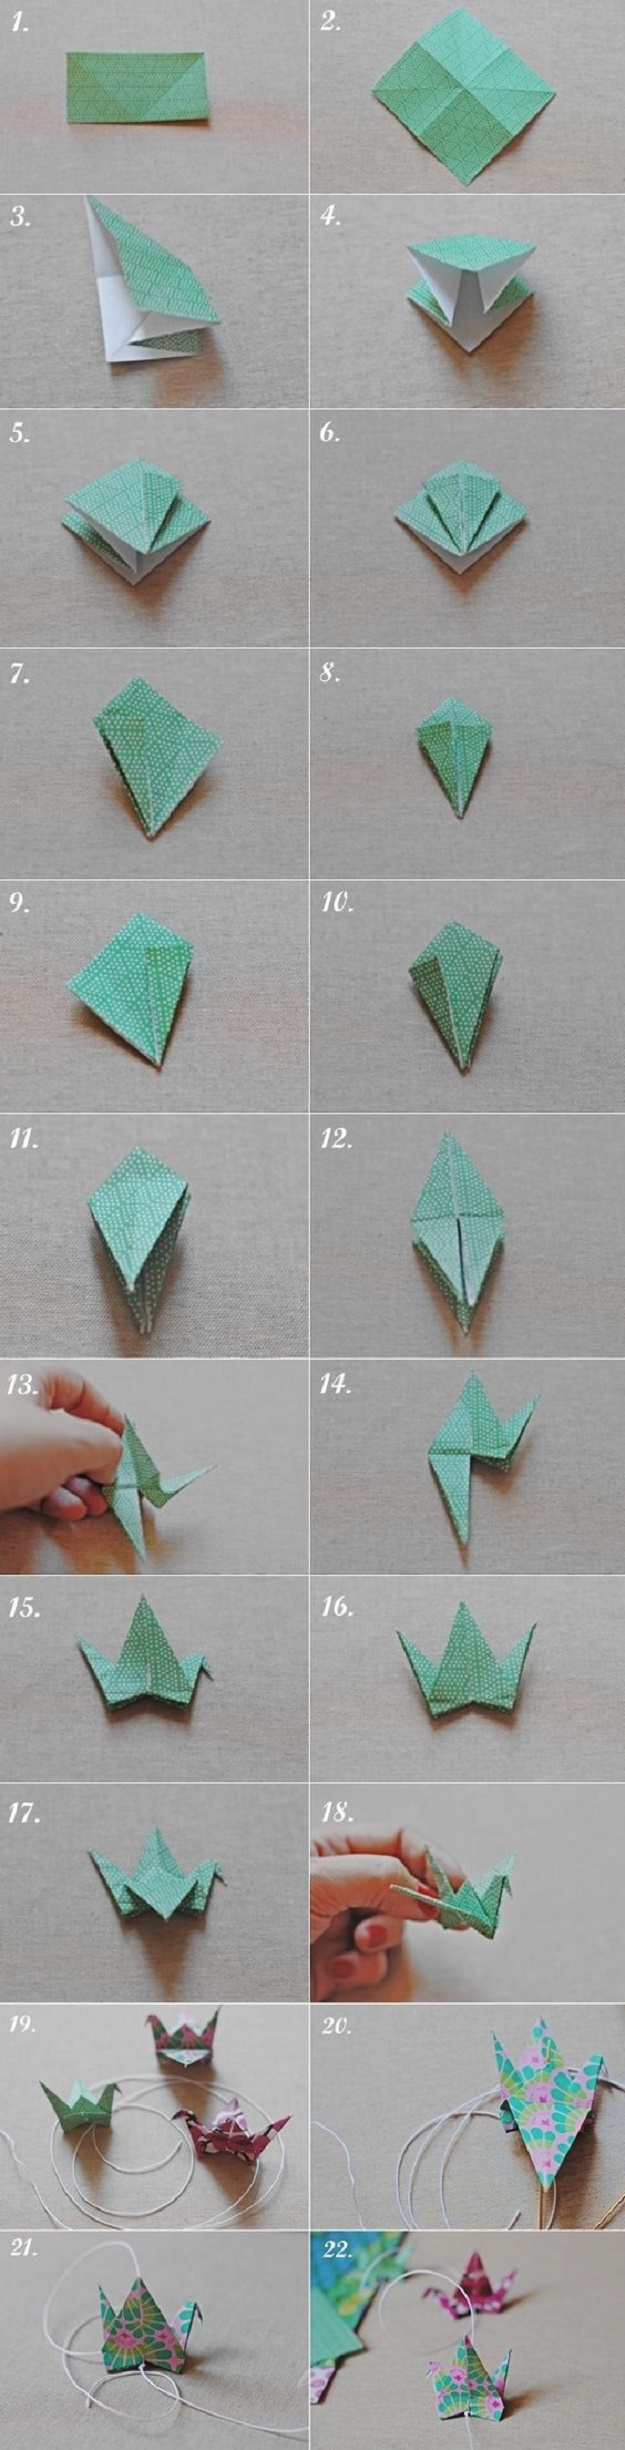 Best Origami Tutorials - Bird Origami - Easy DIY Origami Tutorial Projects for With Instructions for Flowers, Dog, Gift Box, Star, Owl, Buttlerfly, Heart and Bookmark, Animals - Fun Paper Crafts for Teens, Kids and Adults #origami #crafts